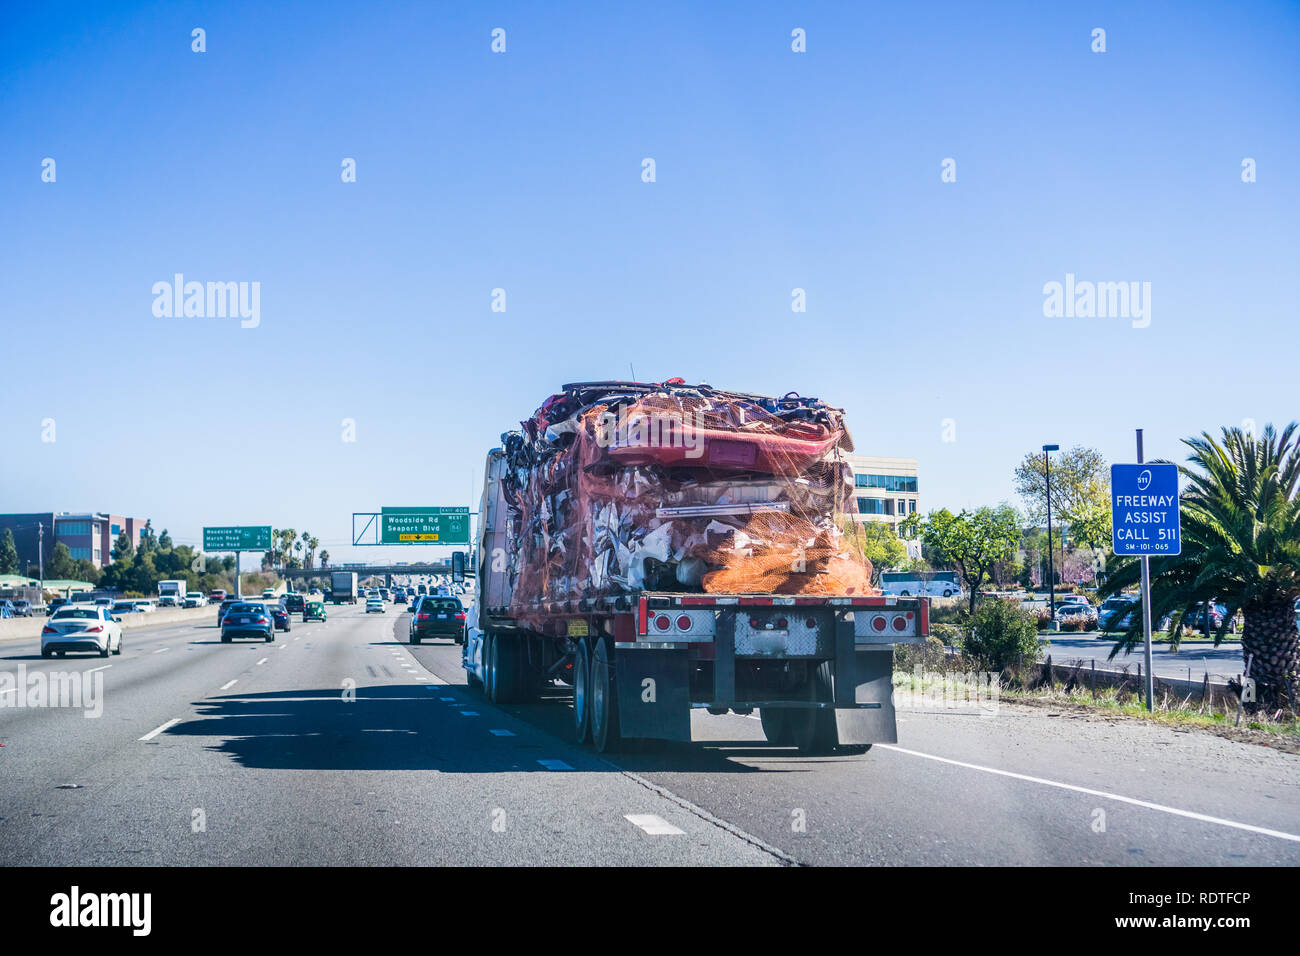 Truck carrying crushed car bodies for recycling, San Francisco bay area, California Stock Photo